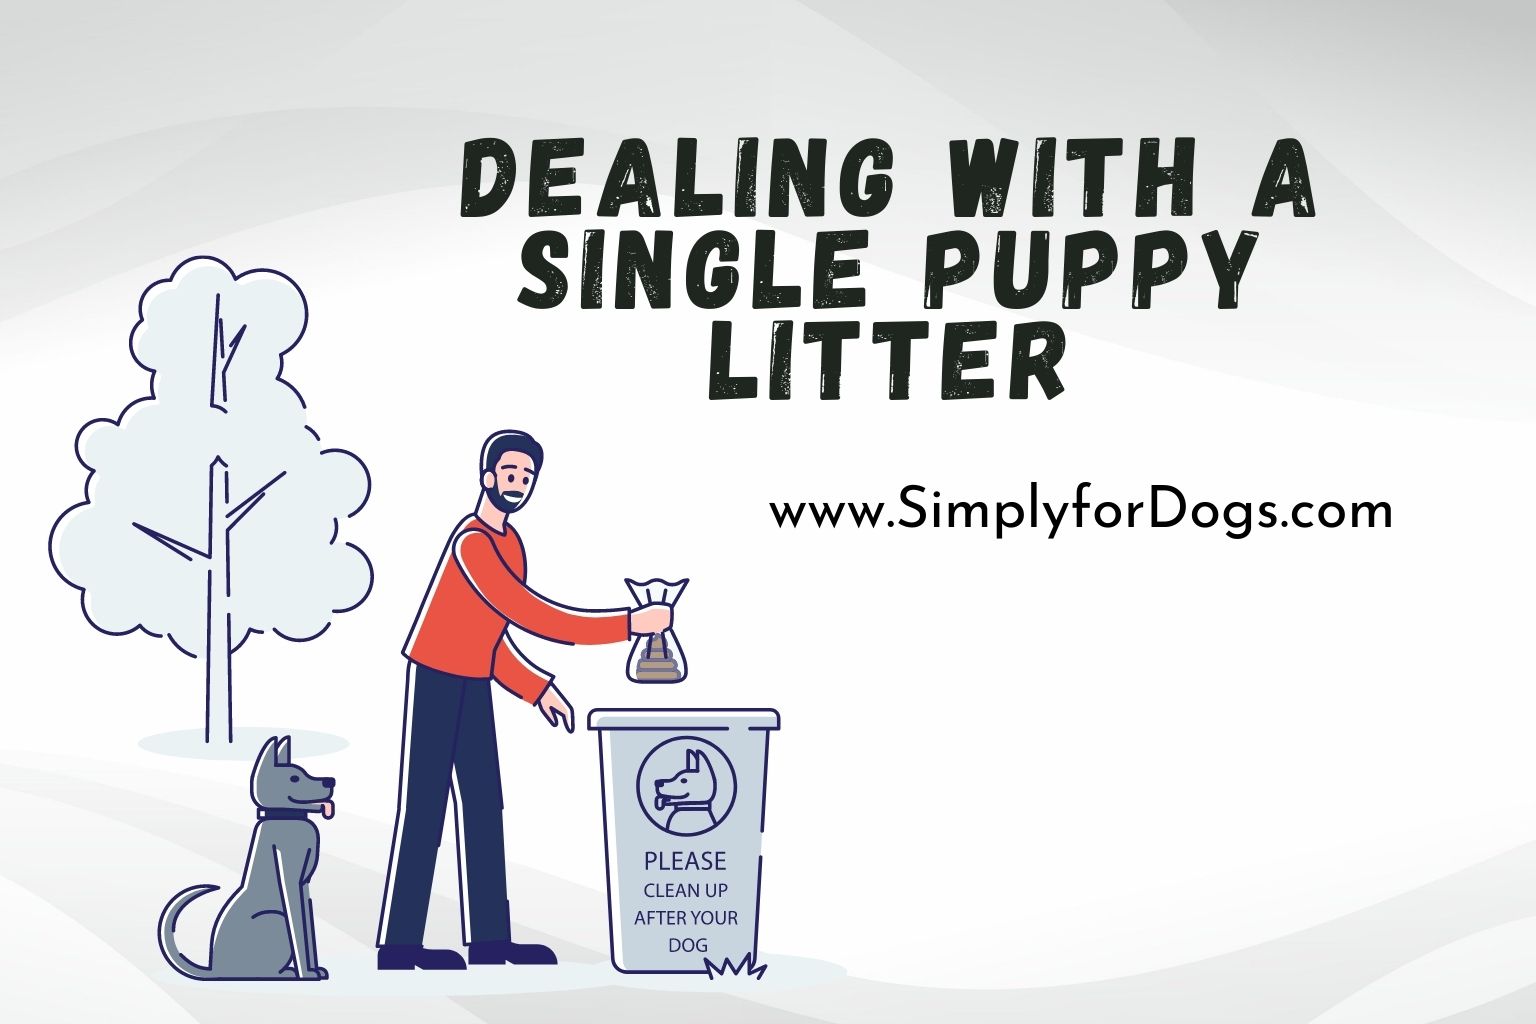 Dealing With a Single Puppy Litter